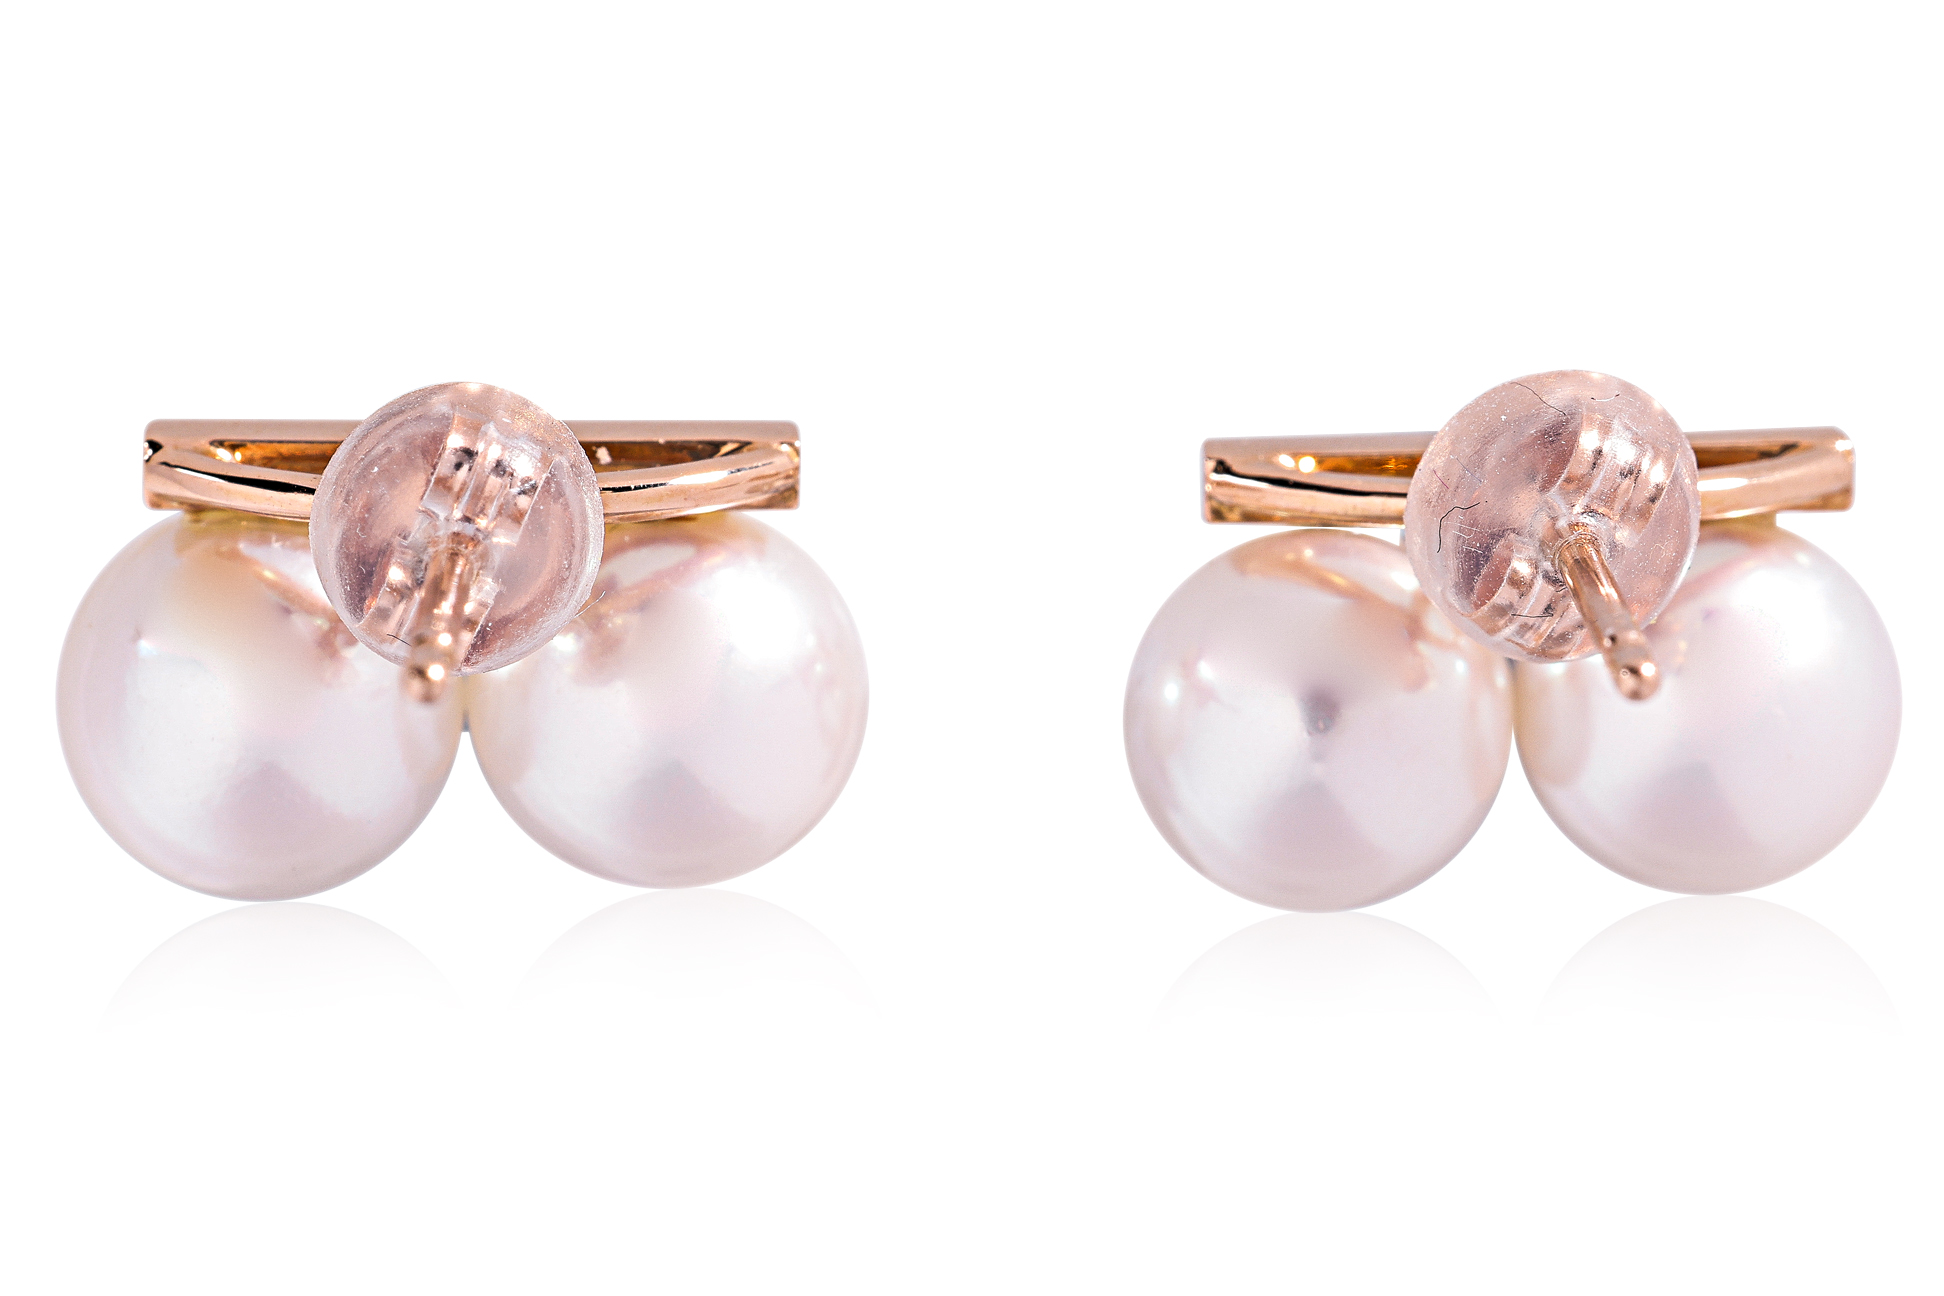 A PAIR OF DOUBLE AKOYA CULTURED PEARL STUDS EARRINGS - Image 2 of 4